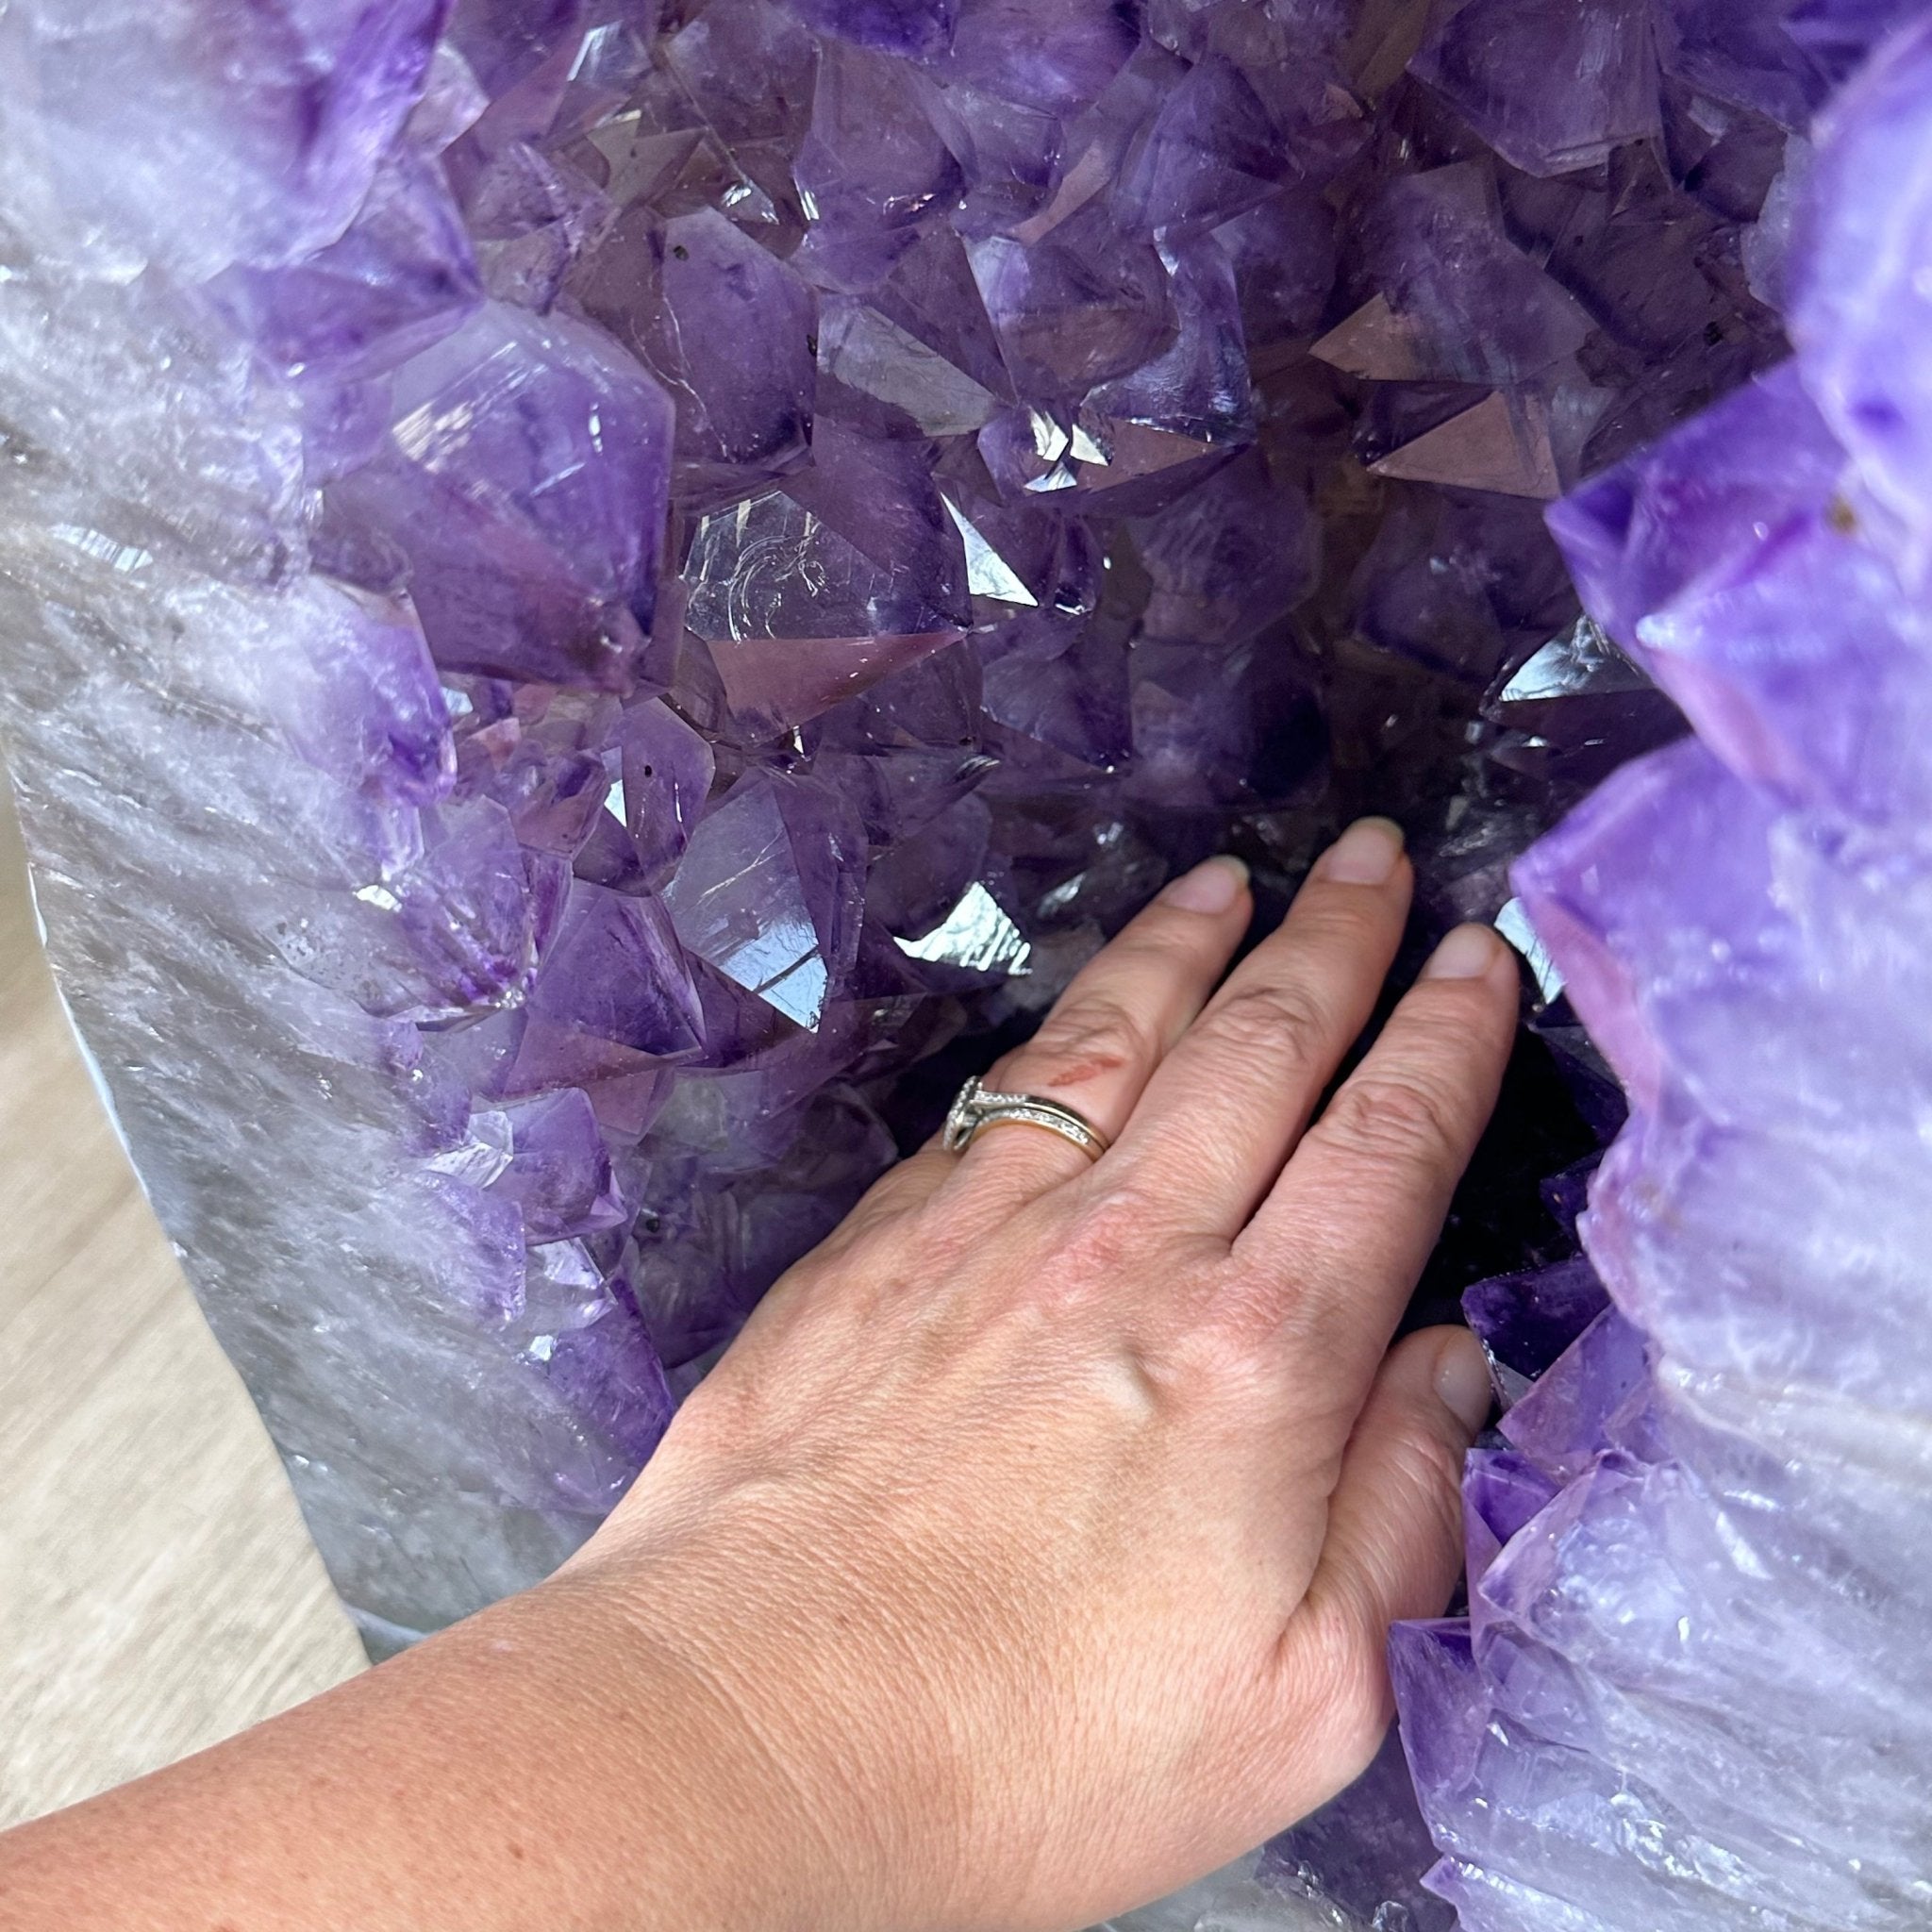 Extra Plus Quality Polished Brazilian Amethyst Cathedral, 144.6 lbs & 36.75" tall Model #5602-0066 by Brazil Gems - Brazil GemsBrazil GemsExtra Plus Quality Polished Brazilian Amethyst Cathedral, 144.6 lbs & 36.75" tall Model #5602-0066 by Brazil GemsPolished Cathedrals5602-0066